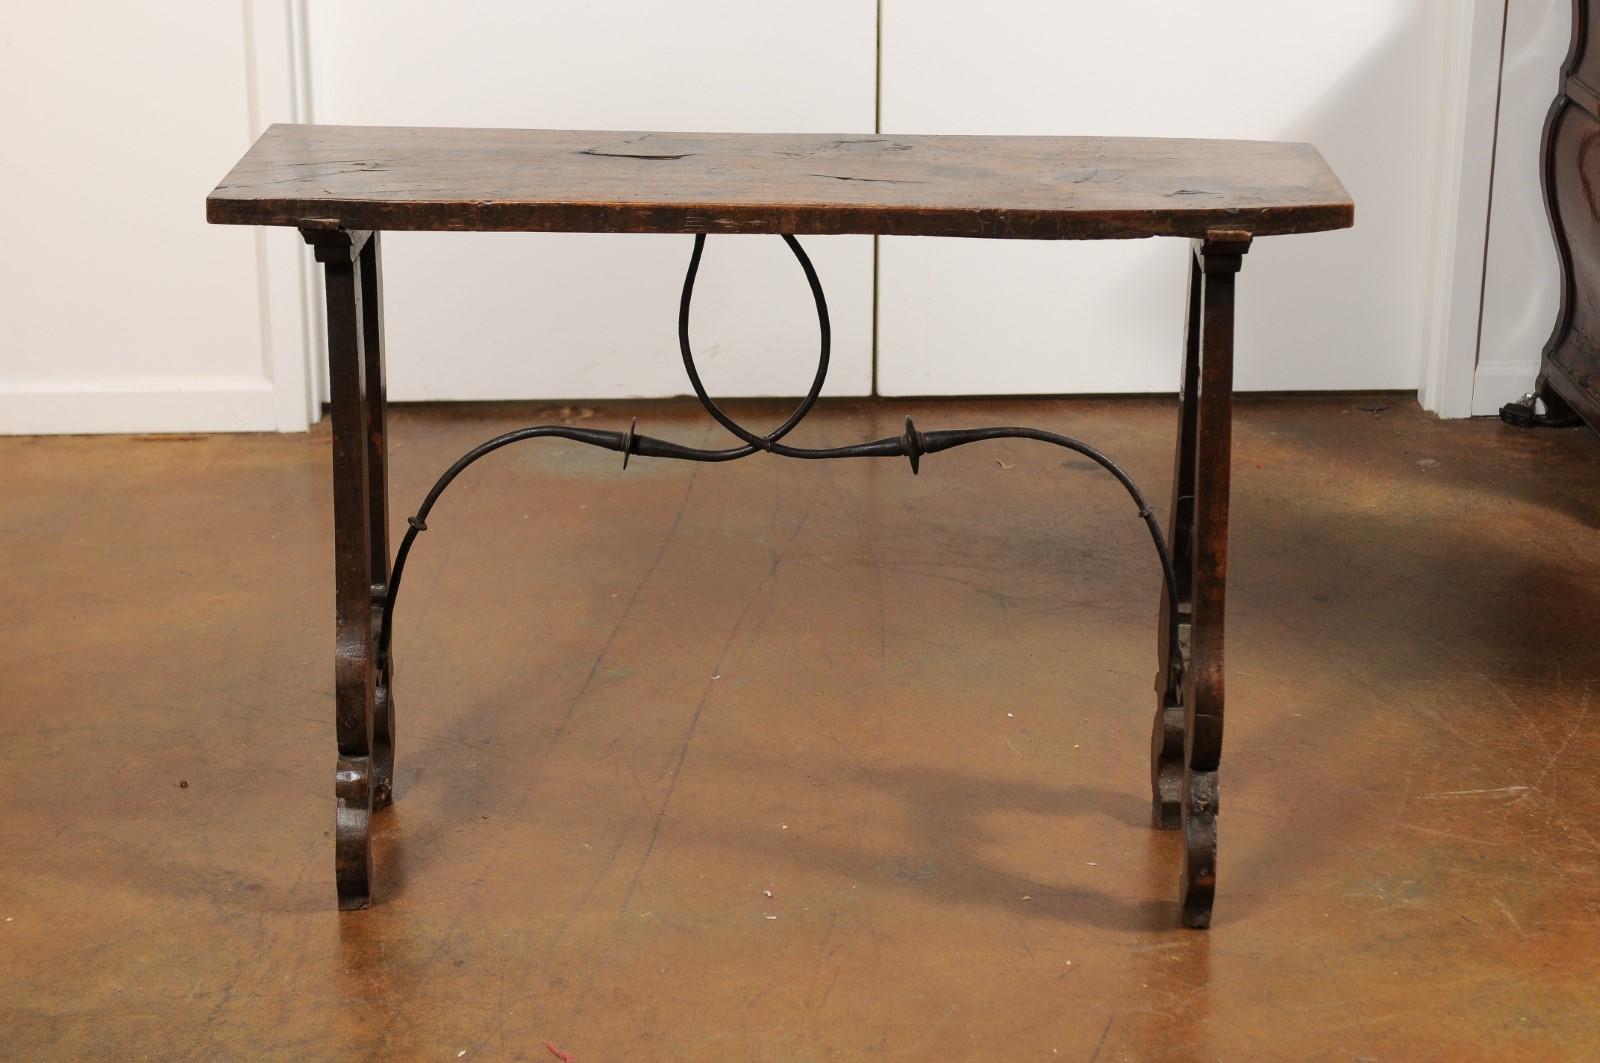 French 19th Century Baroque Walnut Console Table with Lyre Legs and Stretcher (19. Jahrhundert)